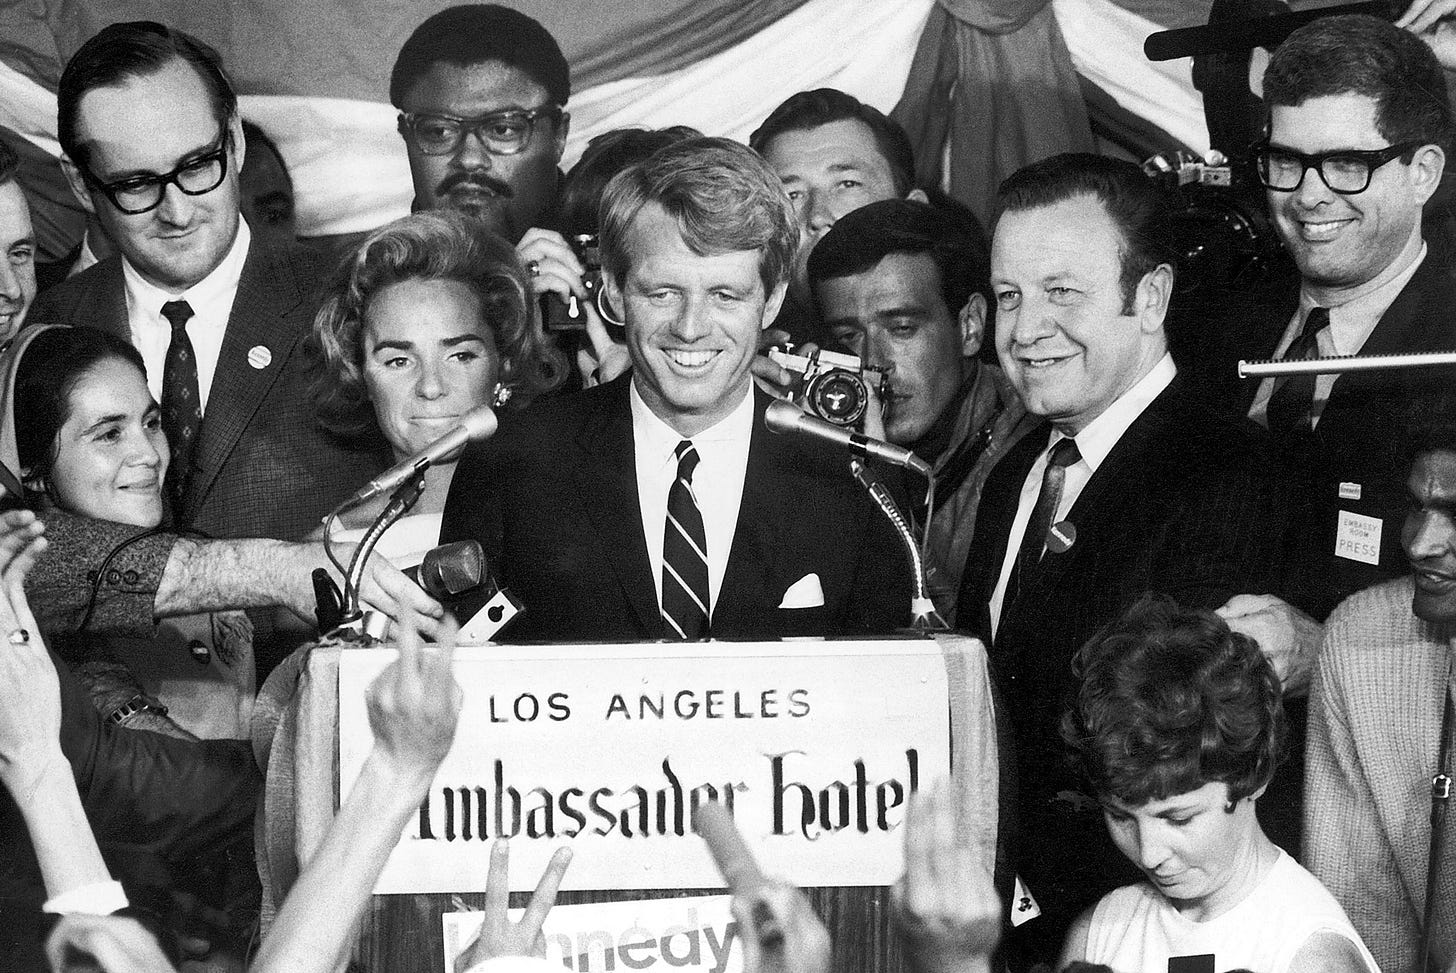 black and white photo of Rosey Grier and others standing behind Robert F. Kennedy speaking at a podium